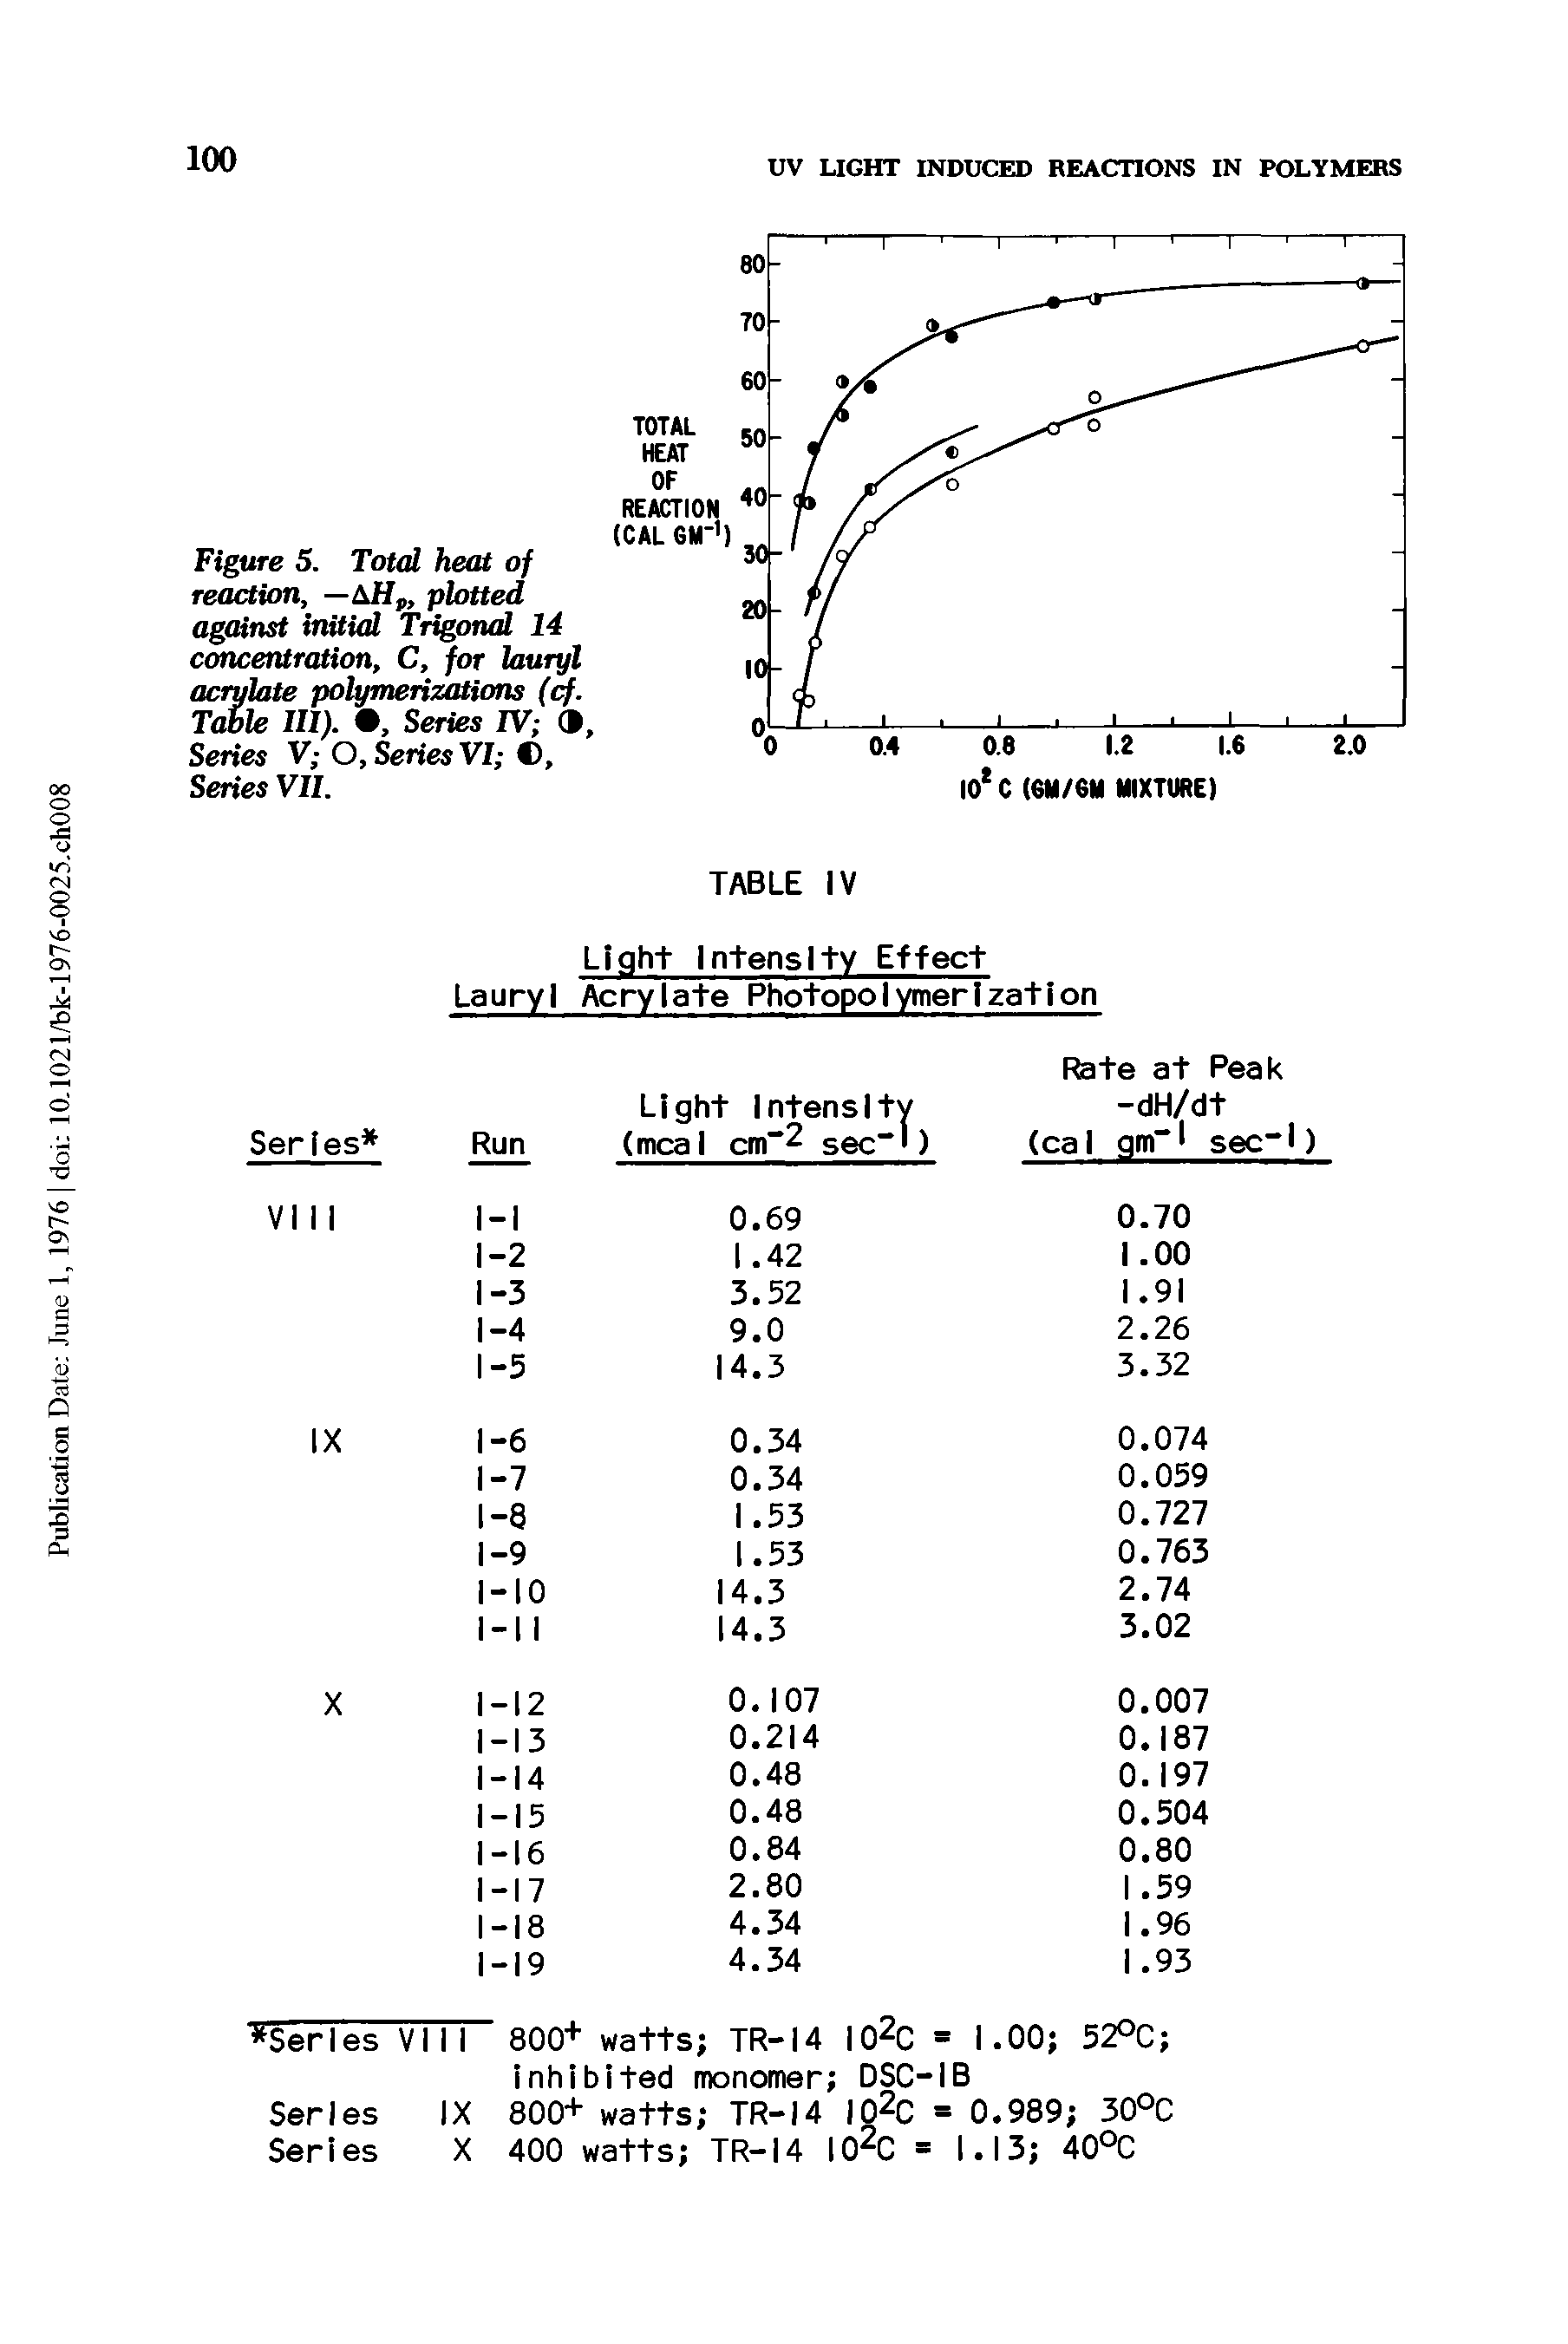 Figure 5. Total heat oj reaction, — plotted against initial T otud 14 concentration, C, for lauryl acrylate polymerizations Table III). , Series W , Series V O, Series VI t). Series VII.